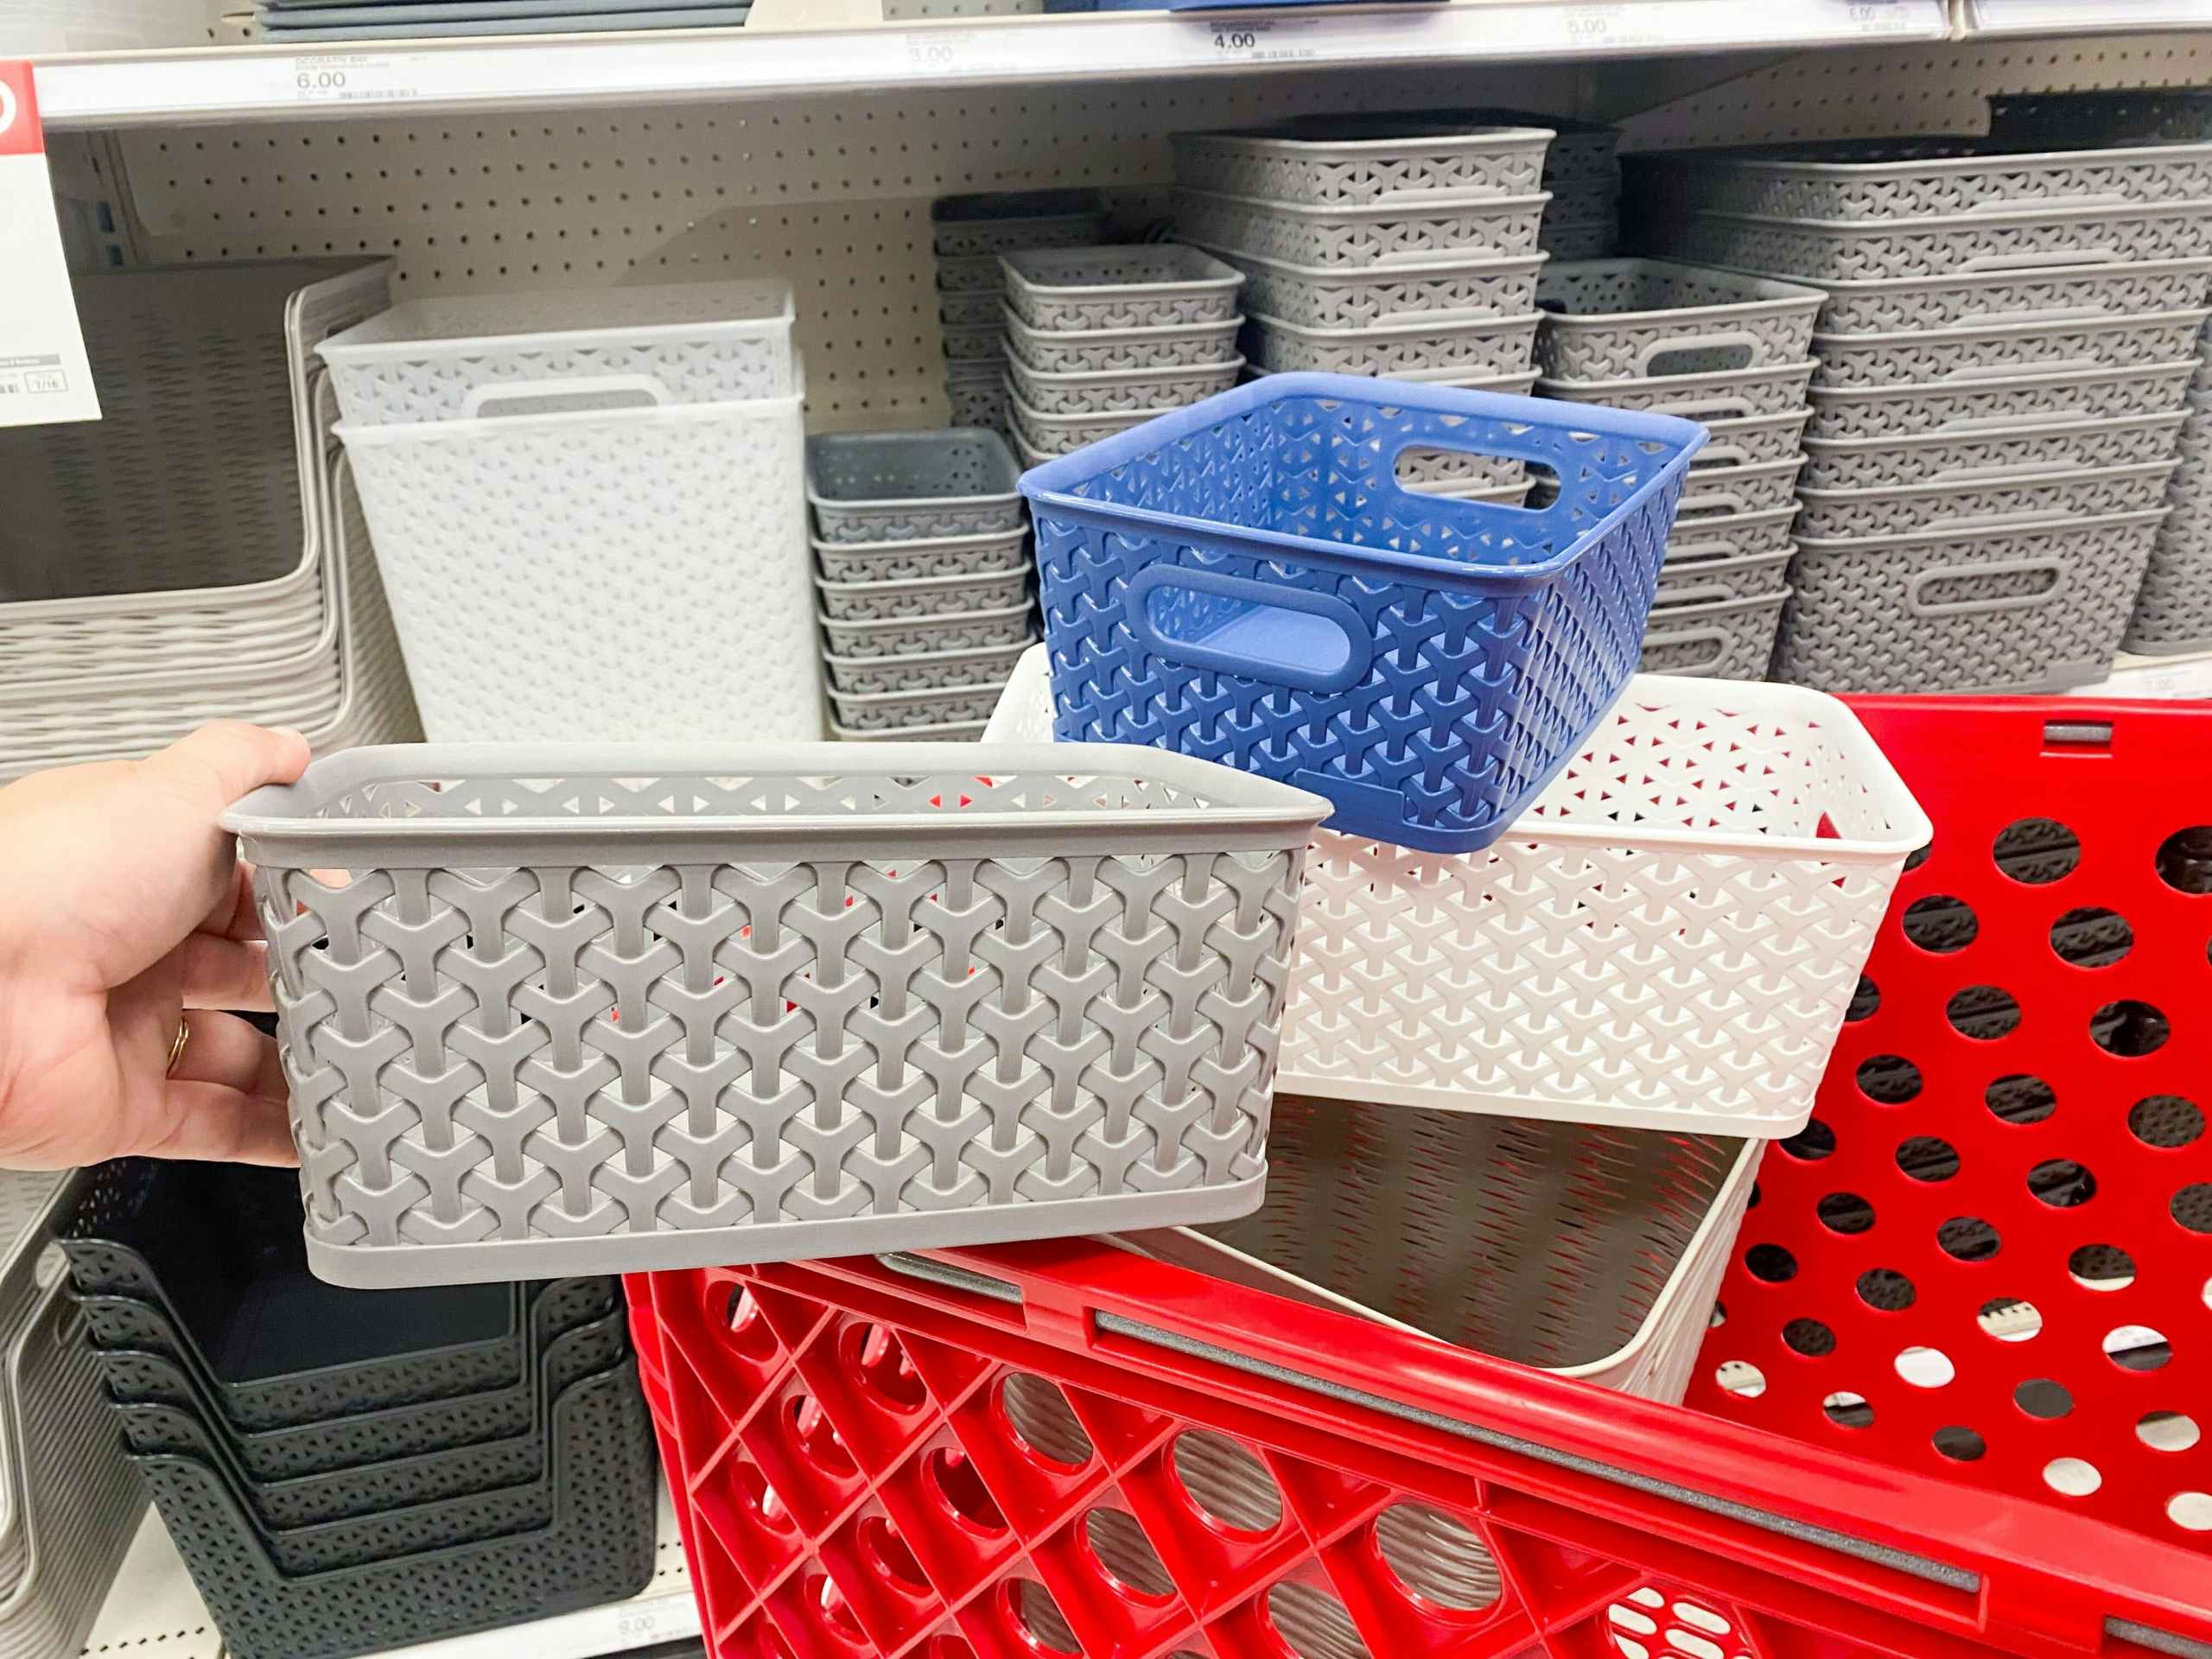 Three small decorative storage baskets in a Target shopping cart